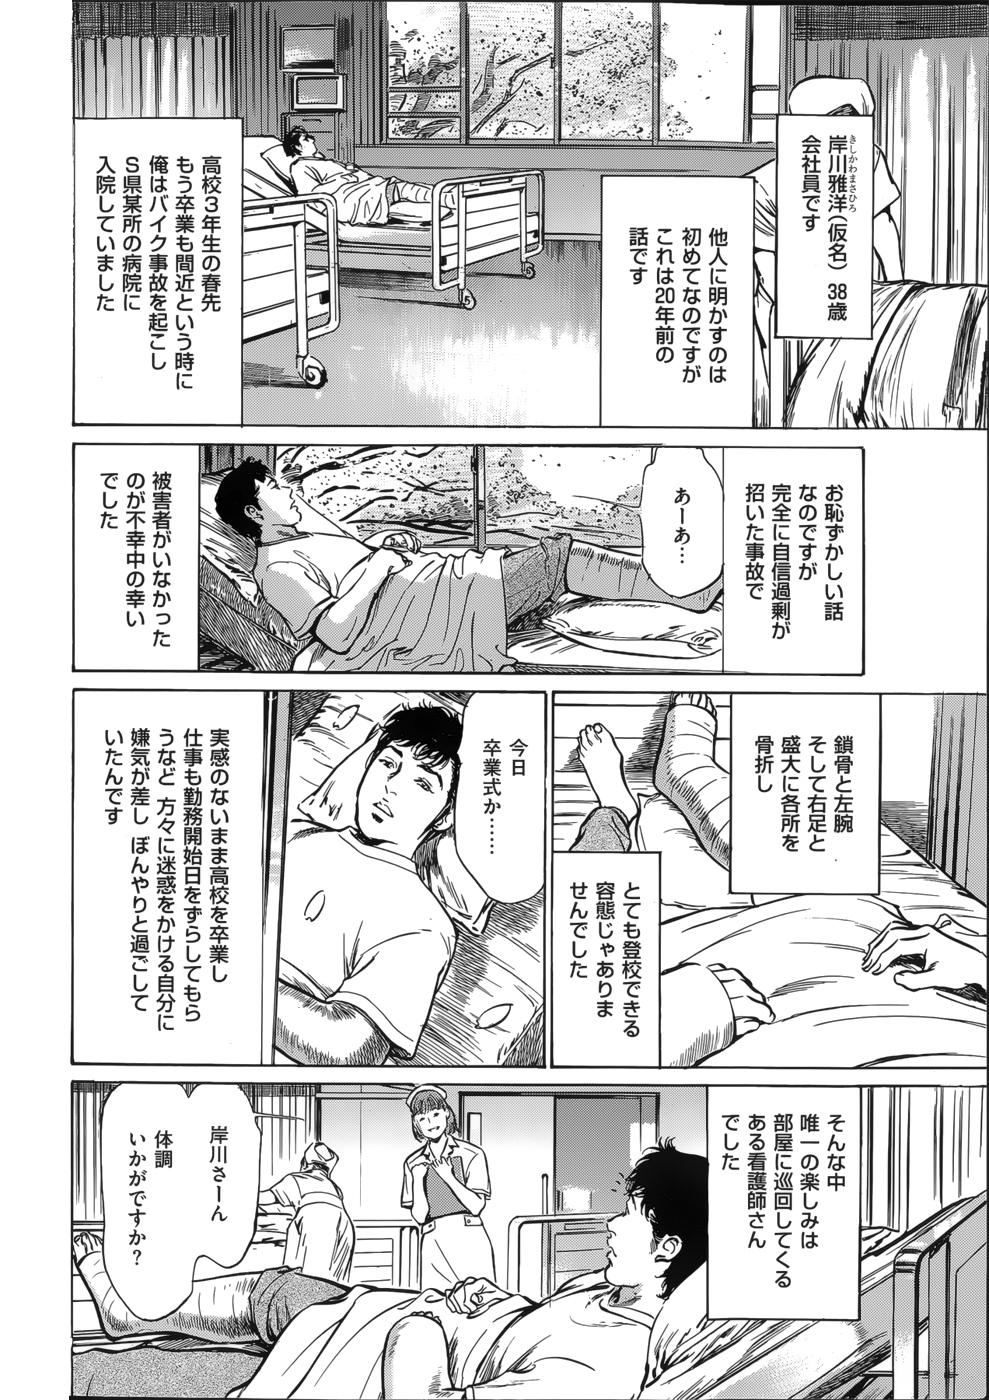 Office たまらない話 Ch.6-8 Fat Ass - Page 2